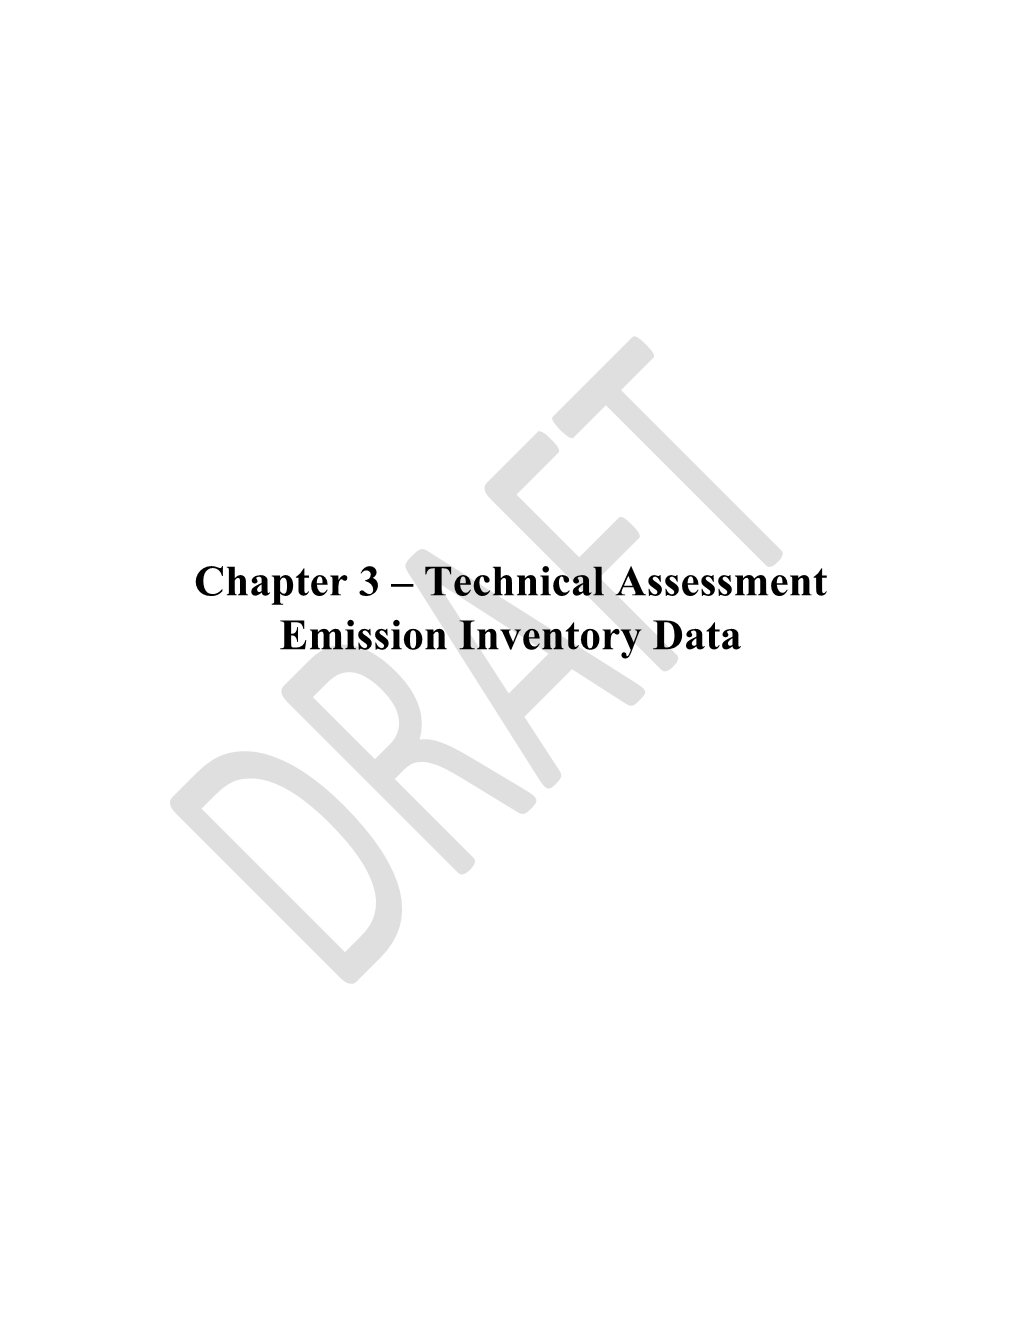 Chapter 3 – Technical Assessment Emission Inventory Data